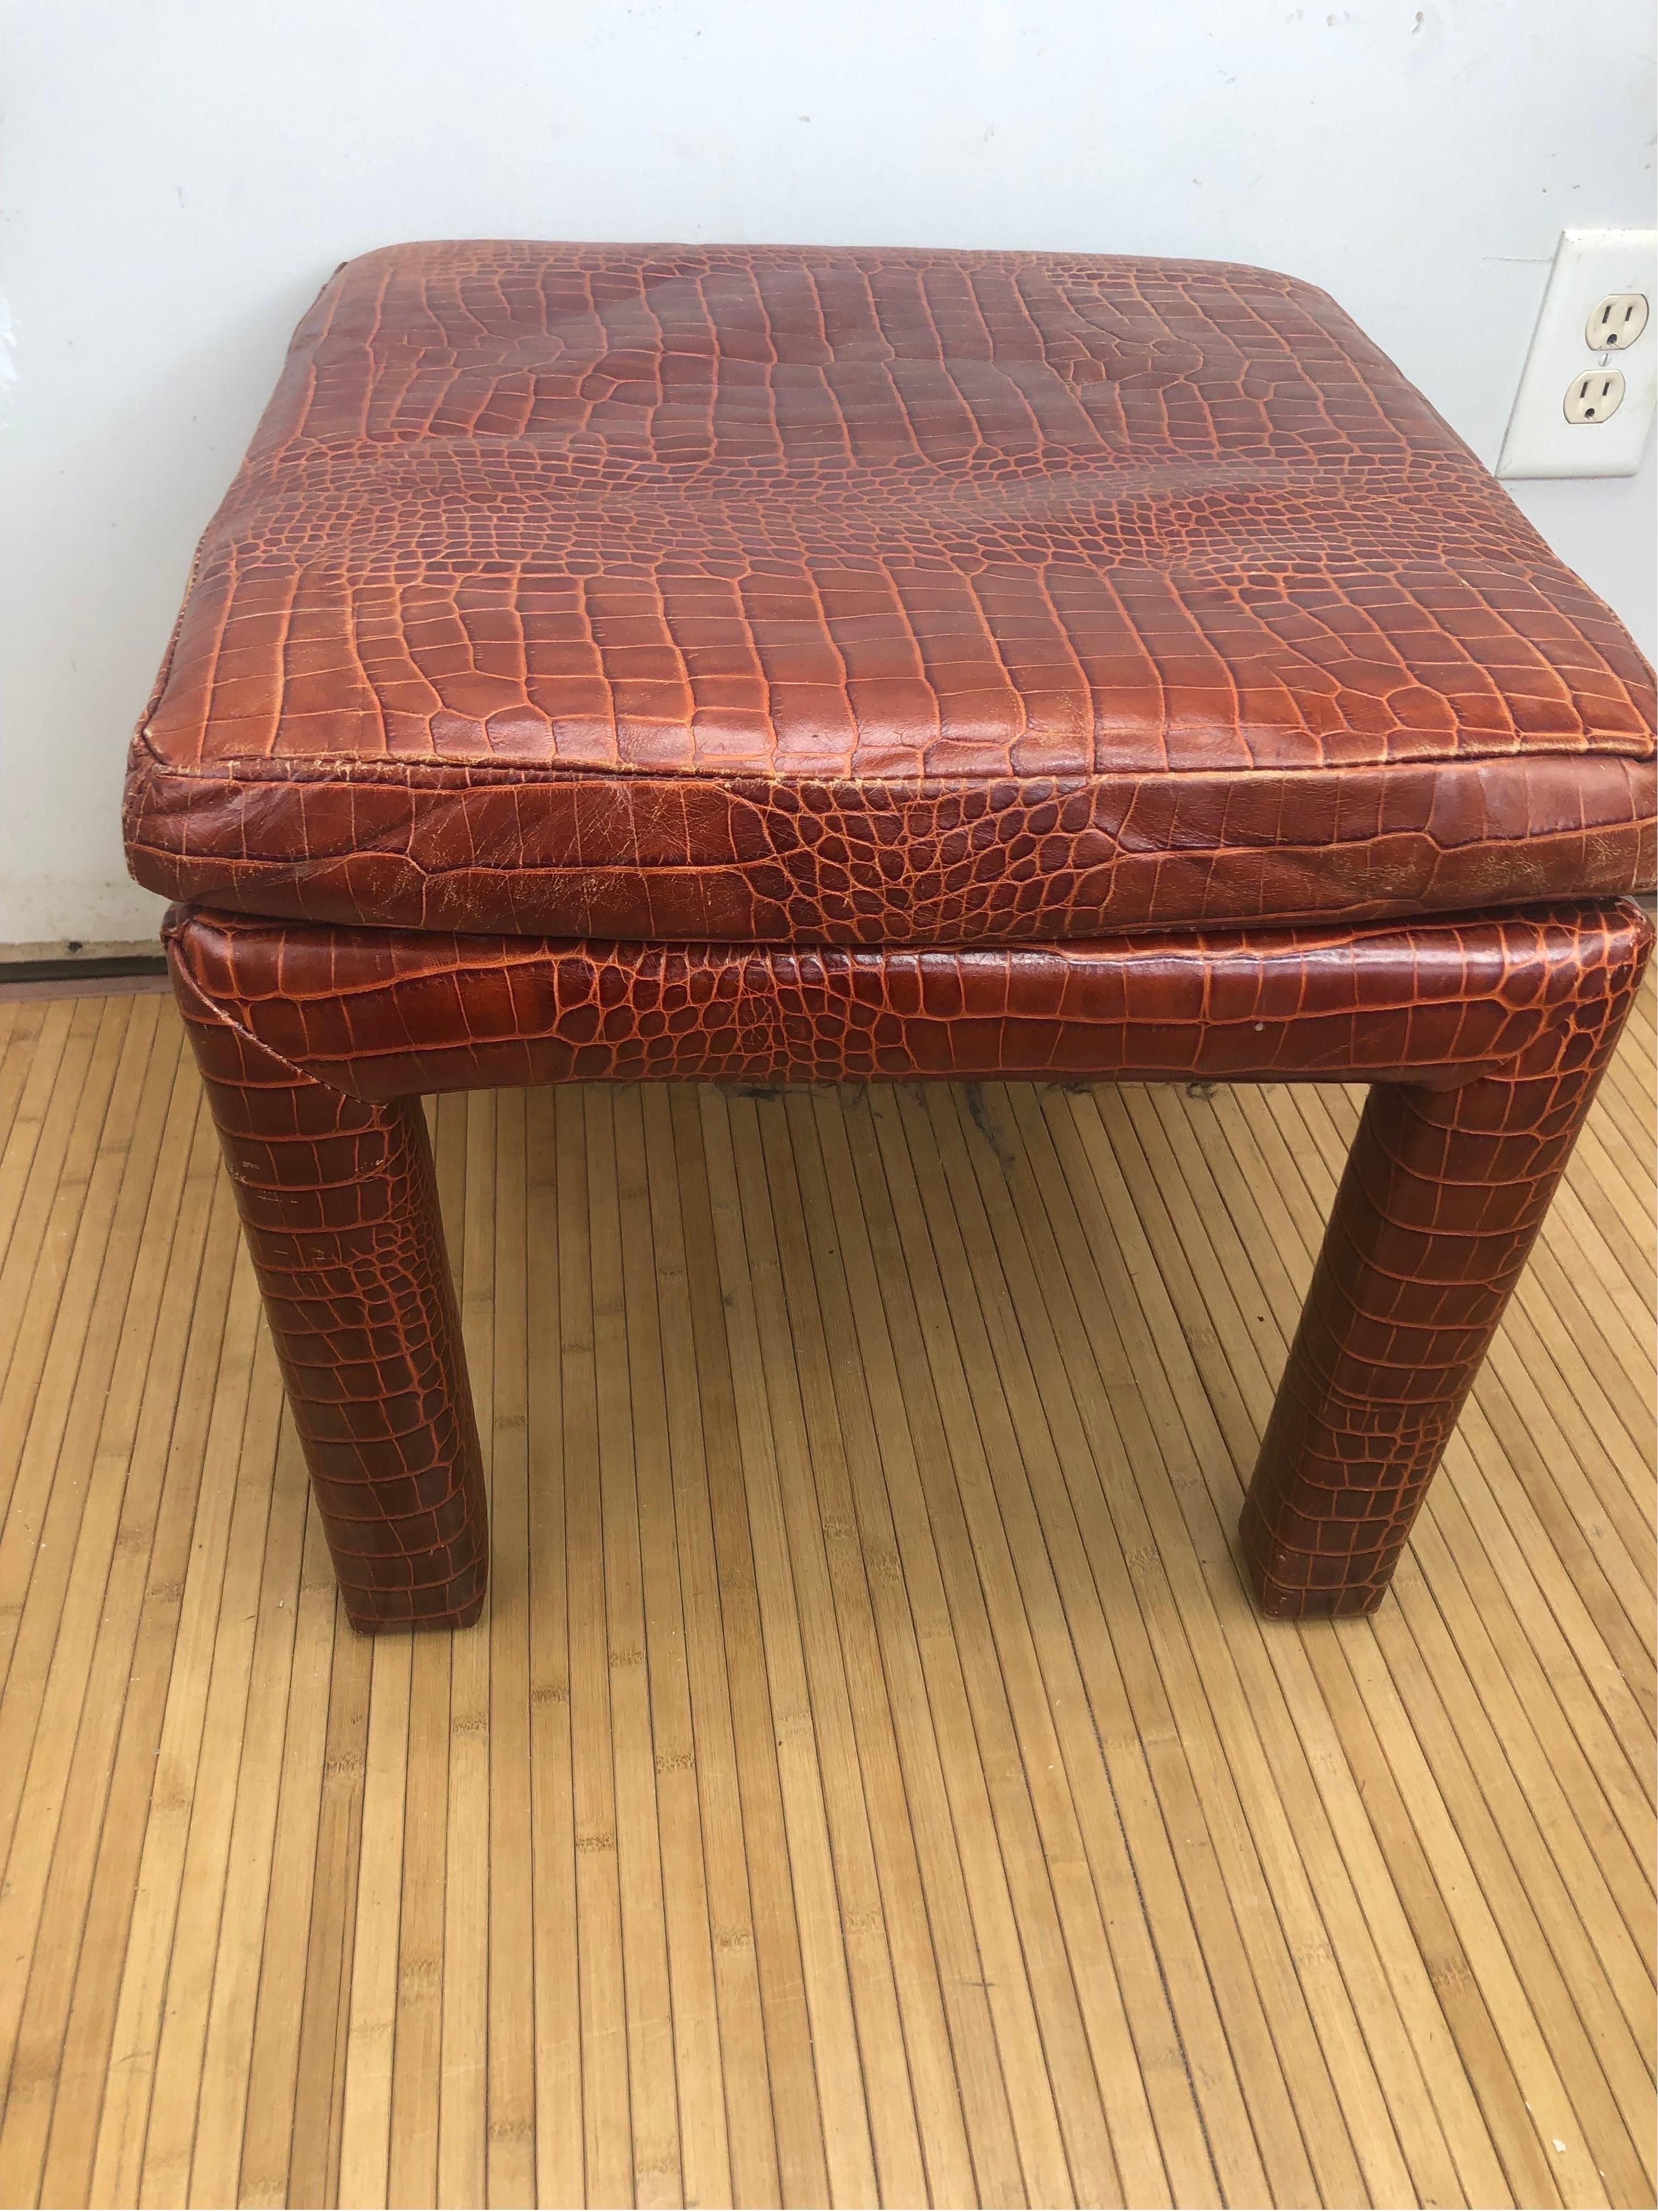 Vintage Henredon Faux Alligator Leather Parsons Stool from the Henredon upholstery collection.